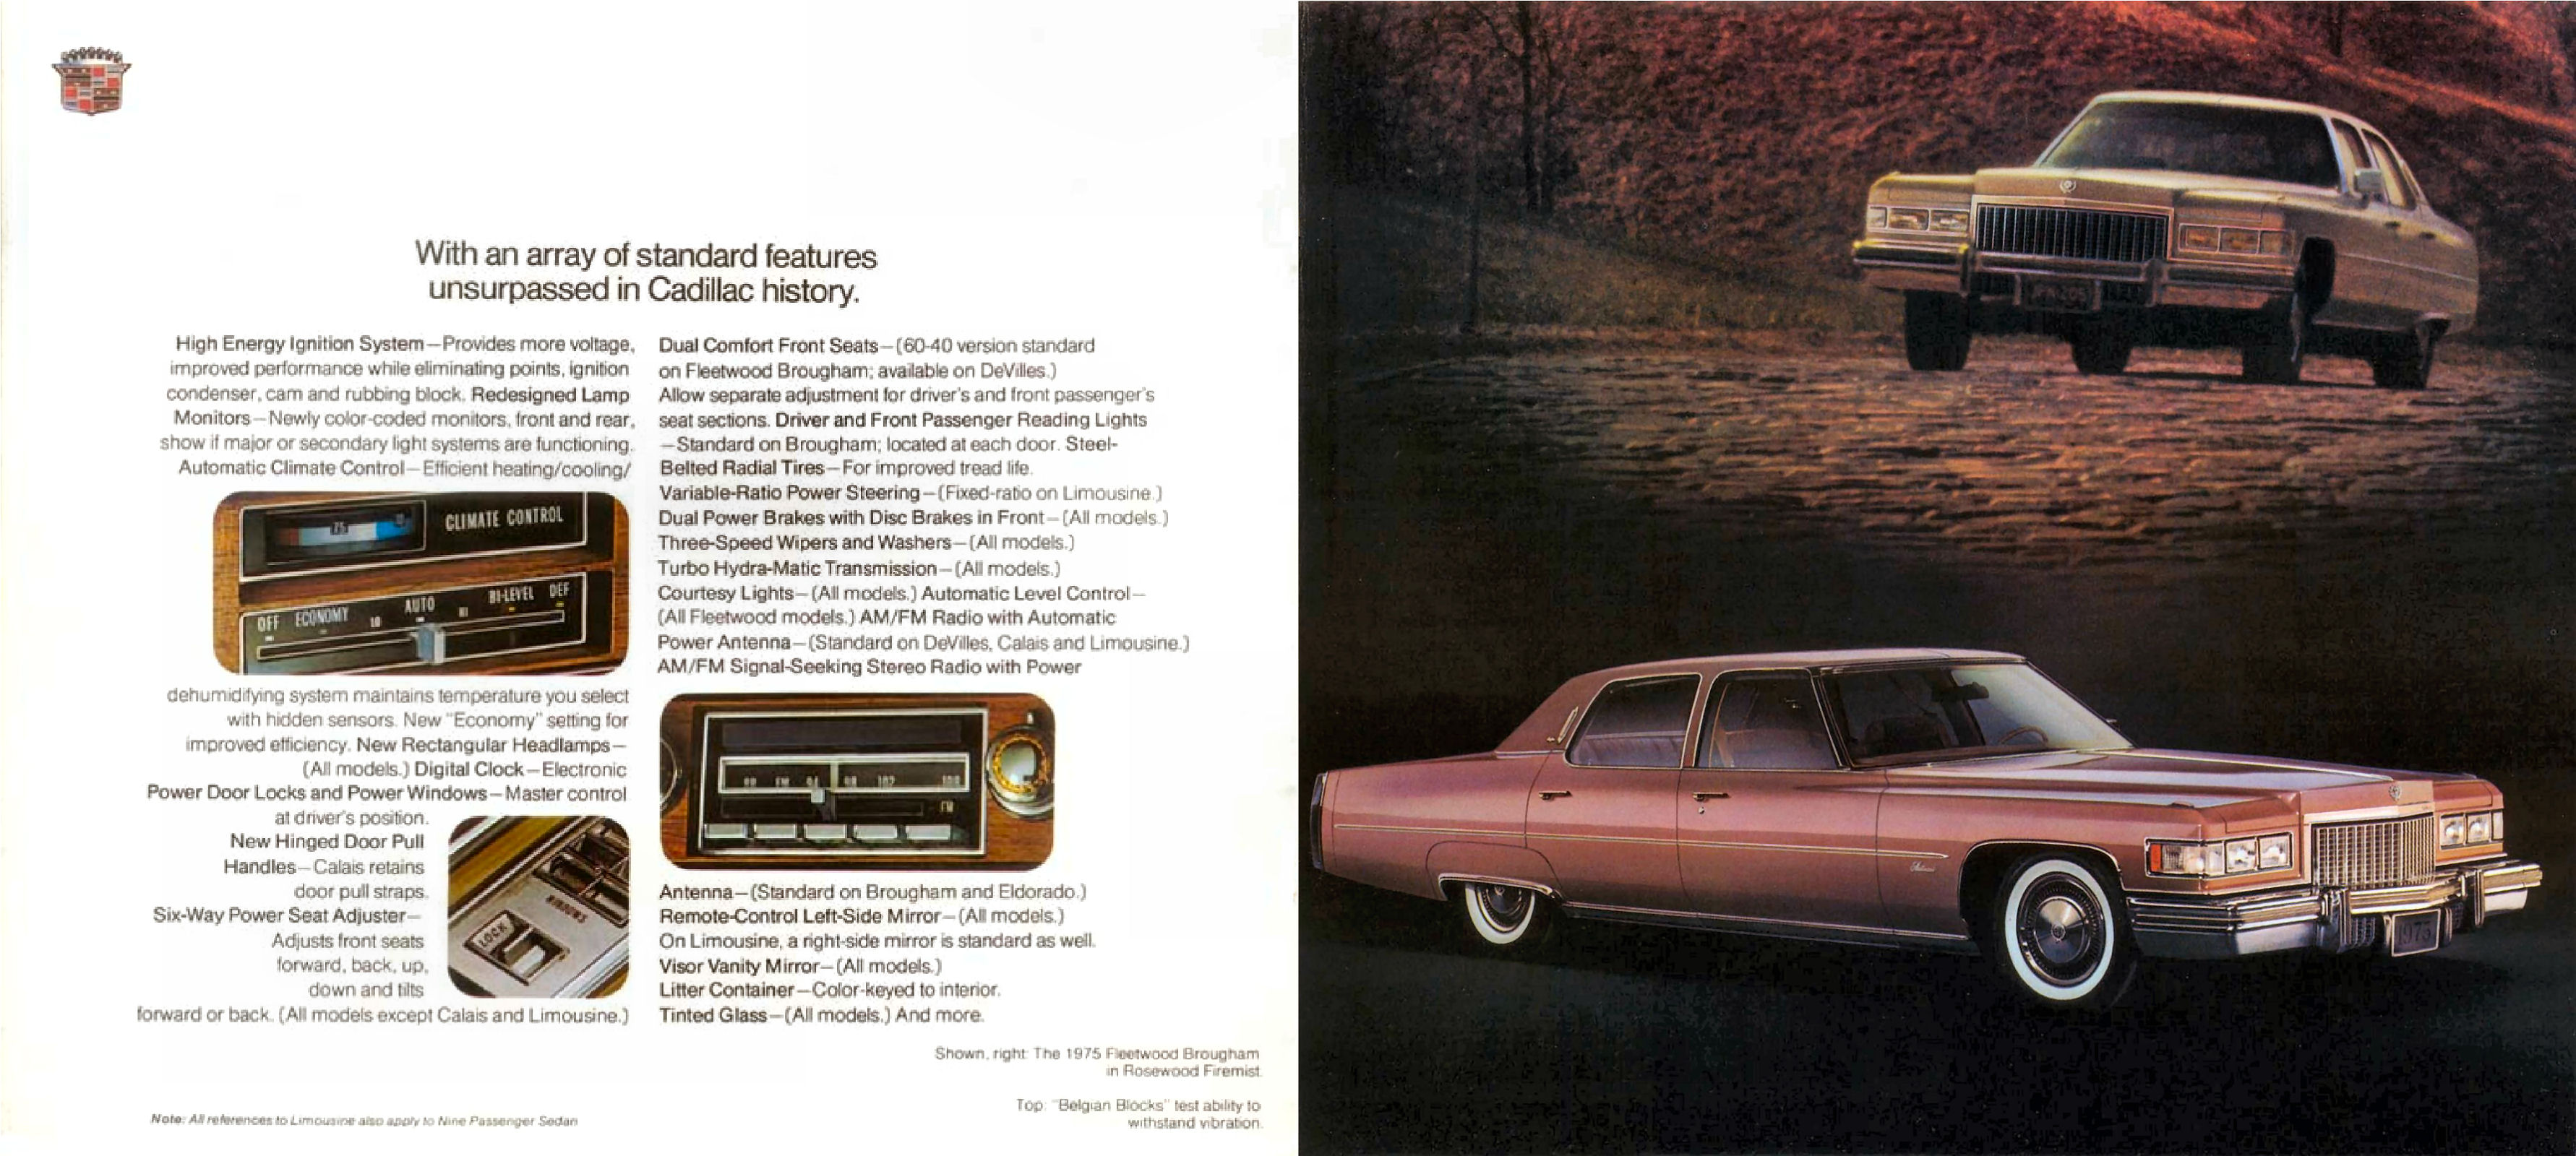 1975 Cadillac Then _ Now Mailer-06-07